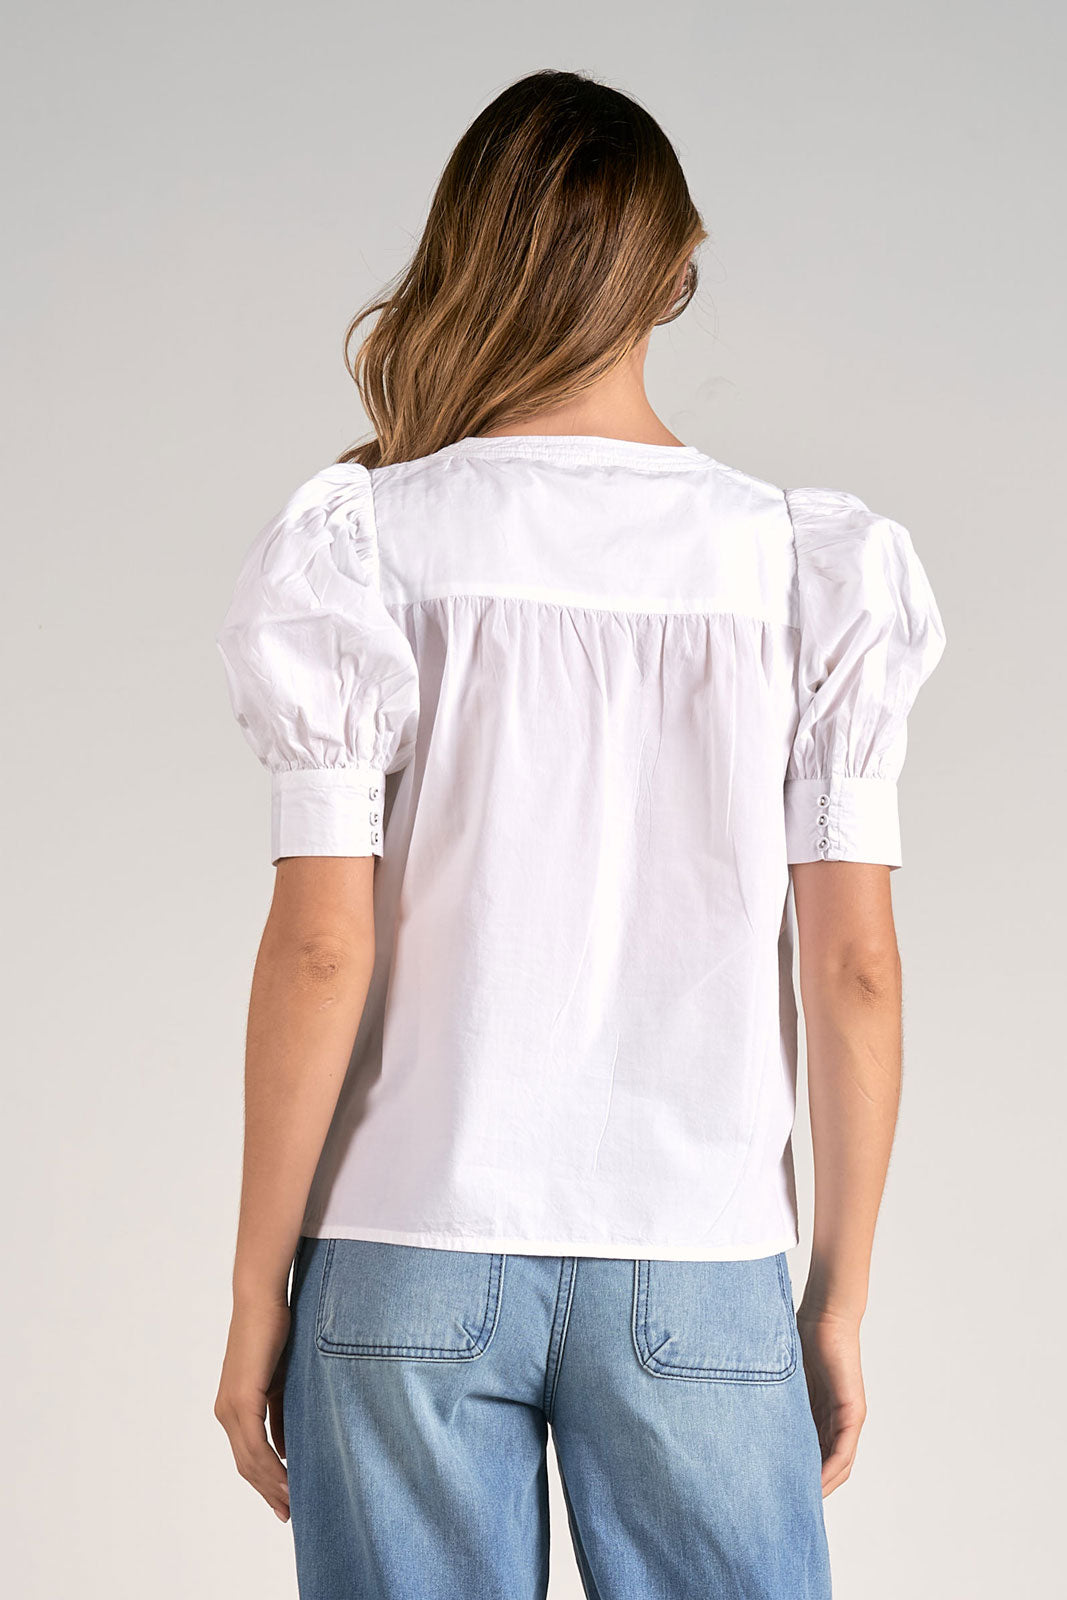 Puff Short Sleeve Top with Cutouts- white